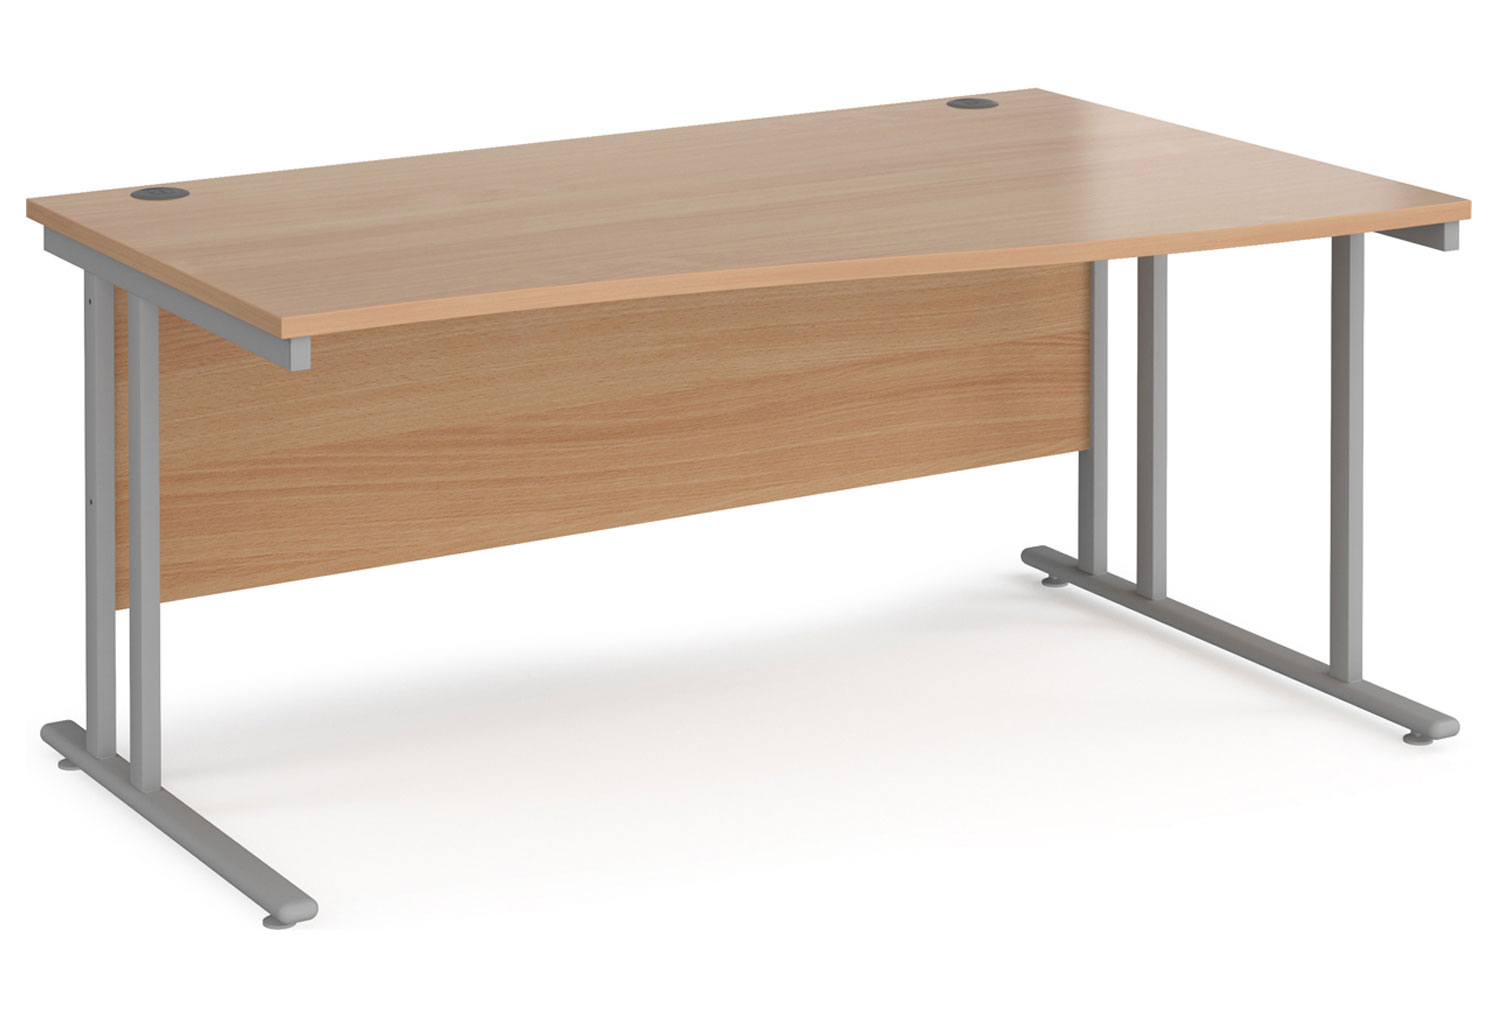 Value Line Deluxe C-Leg Right Hand Wave Office Desk (Silver Legs), 160wx99/80dx73h (cm), Beech, Express Delivery